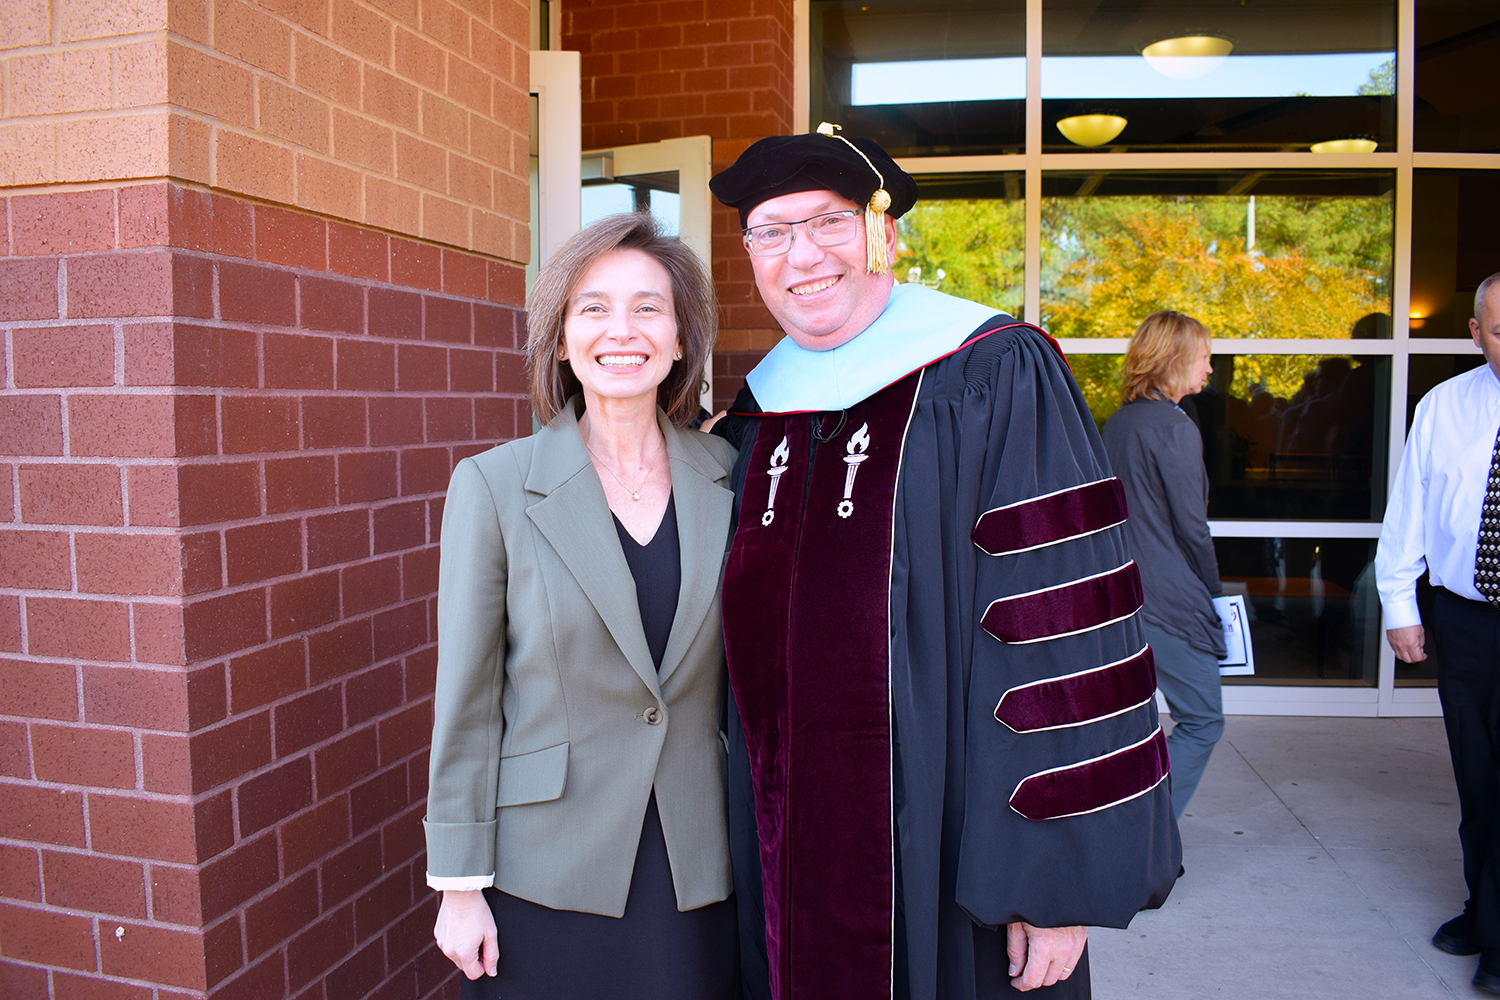 Jennifer Haygood and Dr. McInnis stand together outside the Cole Auditorium